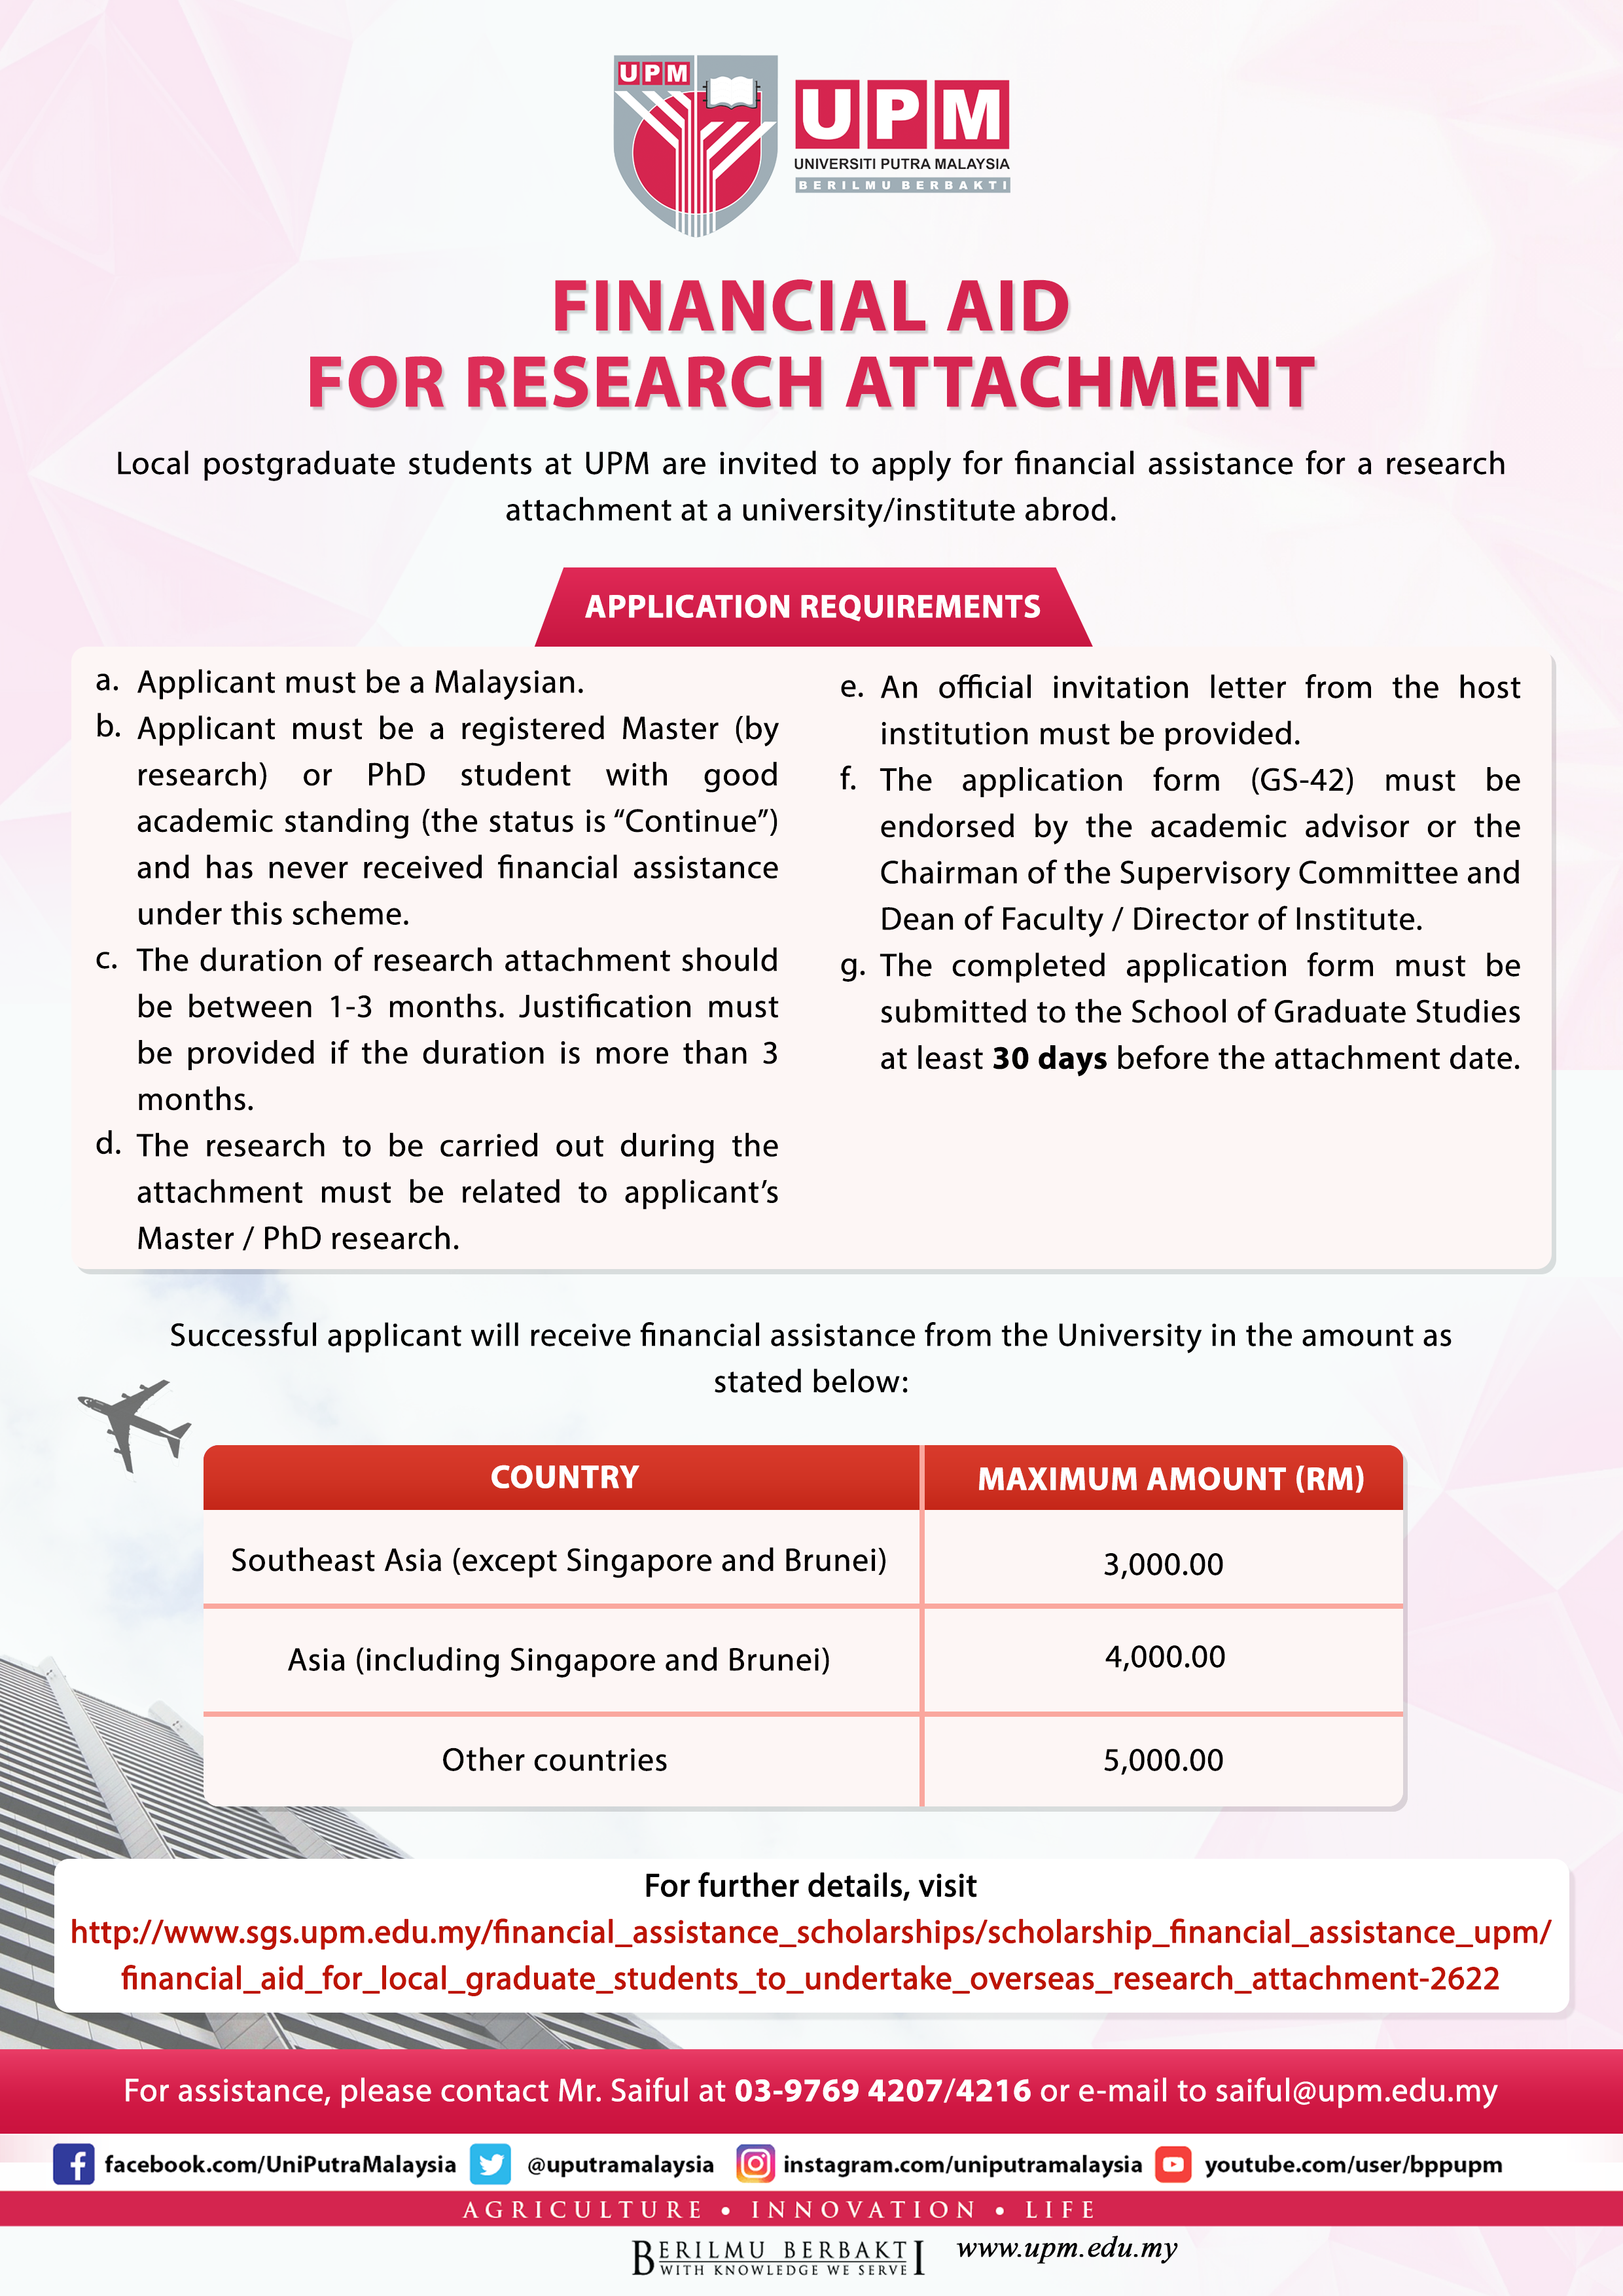 Financial Aid For Local Graduate Students To Undertake Overseas Research Attachment School Of Graduate Studies